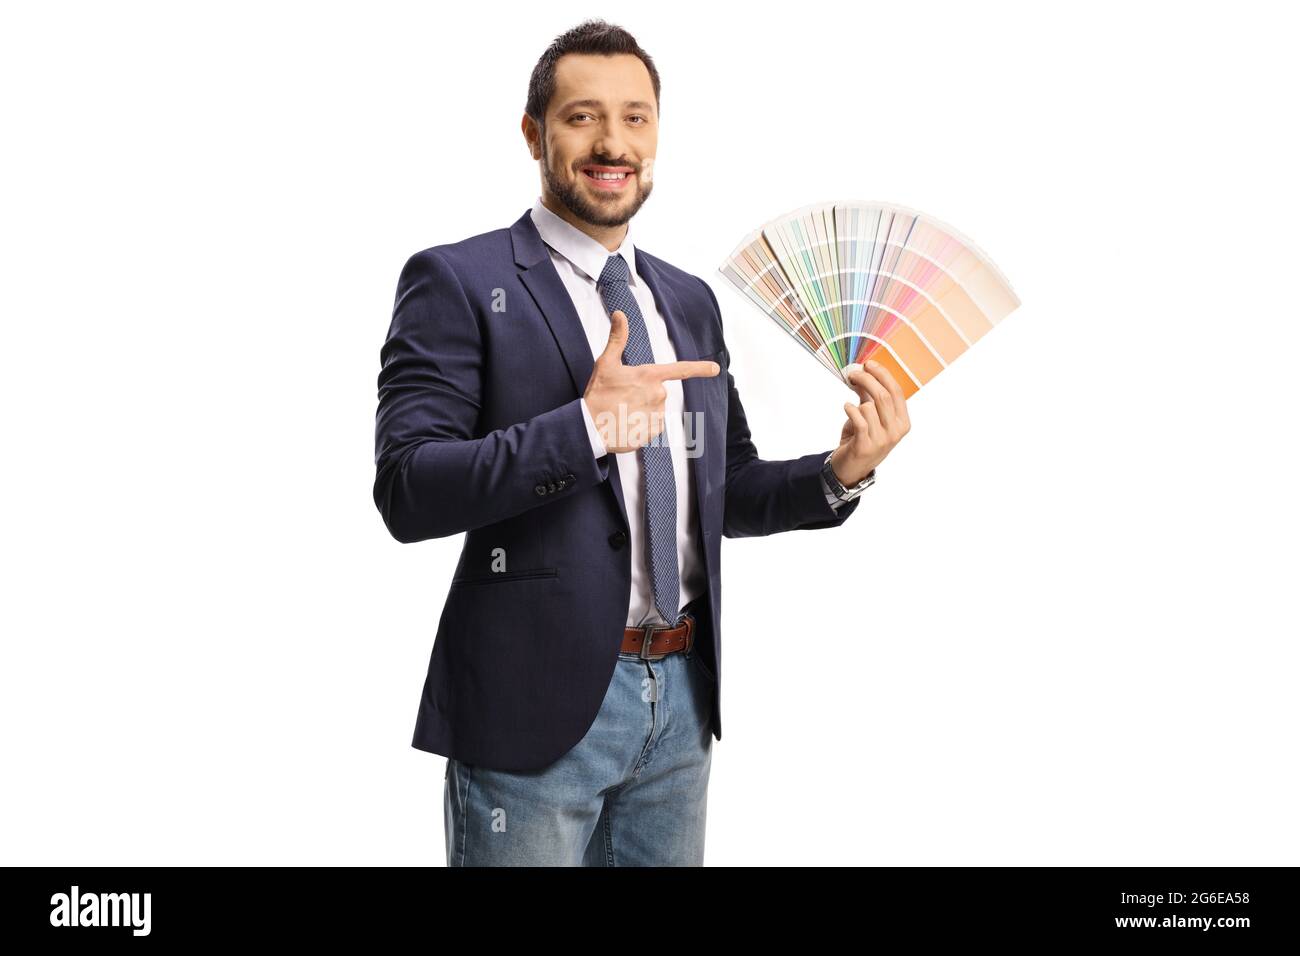 Man holding a color palette and pointing isolated on white background Stock Photo